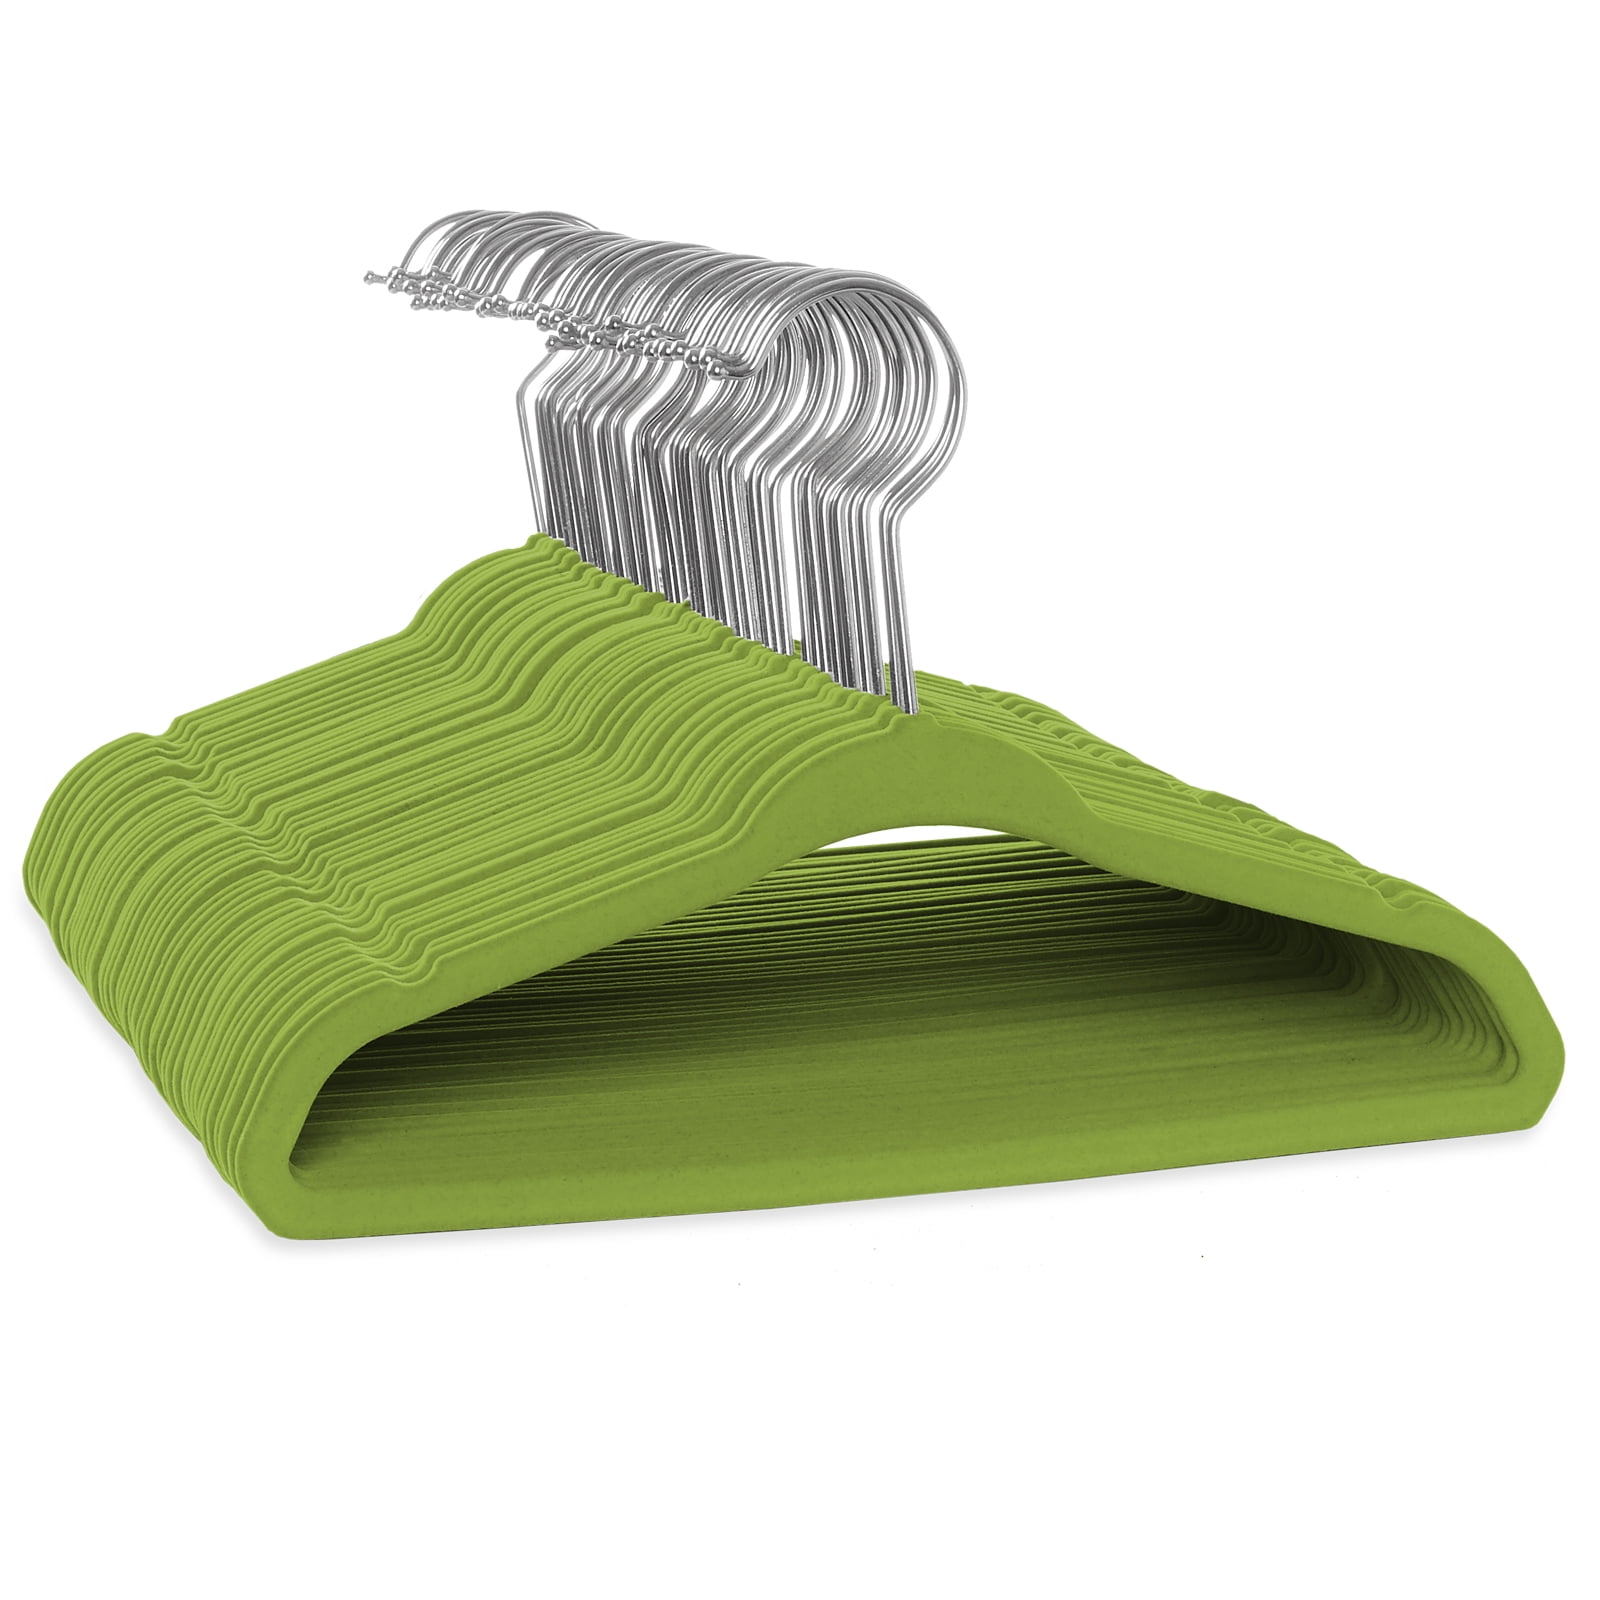 Sage Green Children's Clothing Hangers - The Sewing Collection